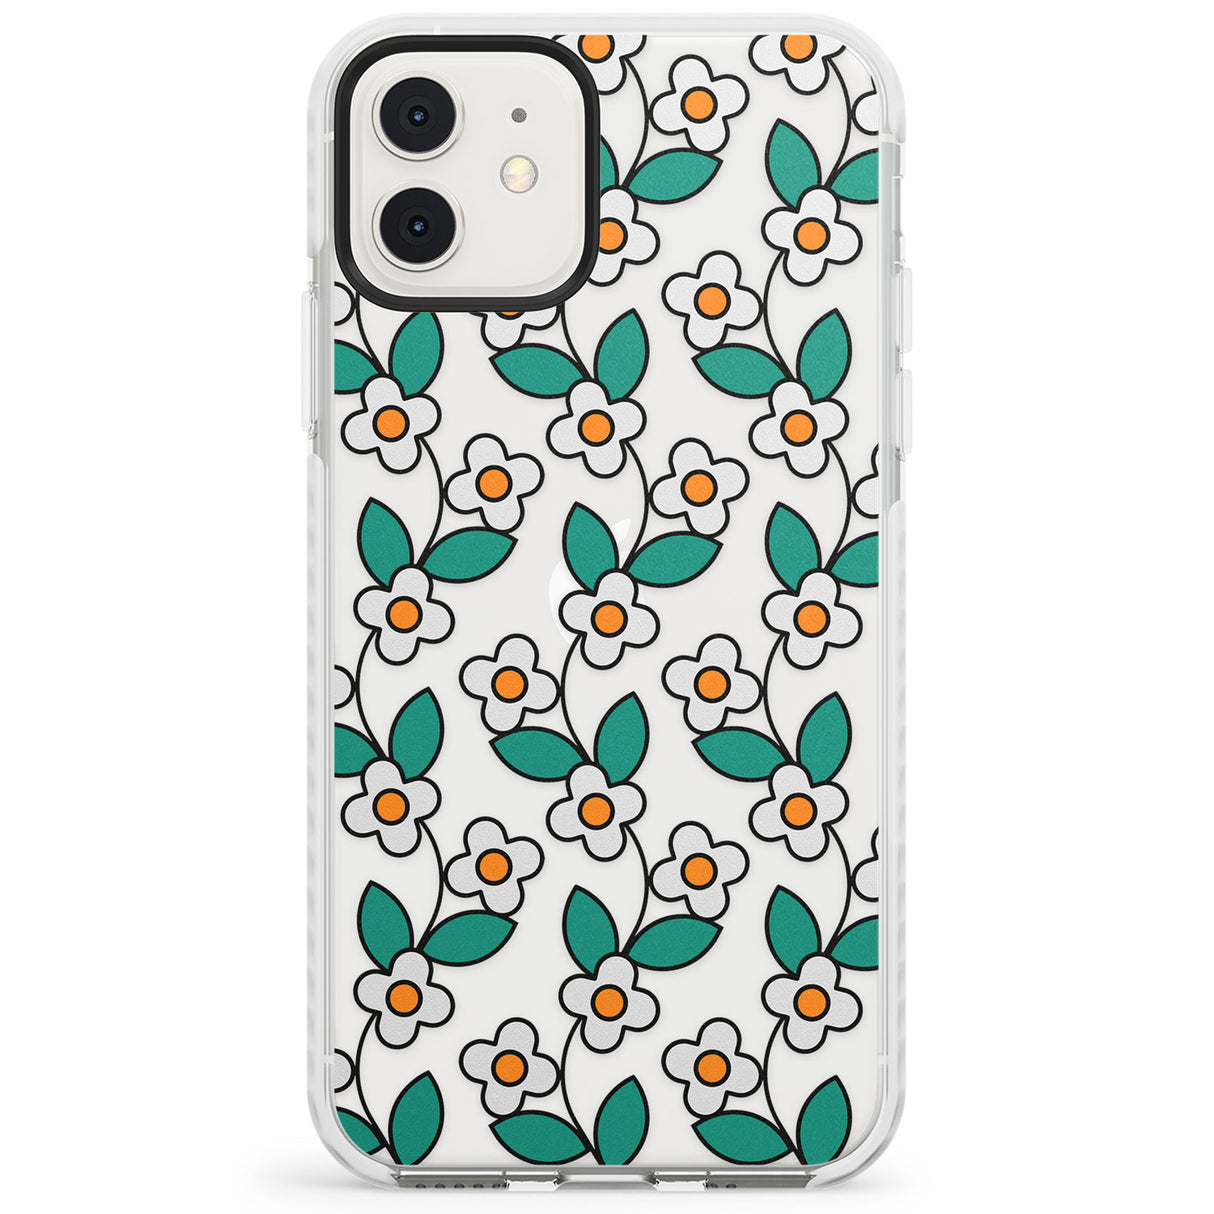 Spring Daisies Impact Phone Case for iPhone 11, iphone 12